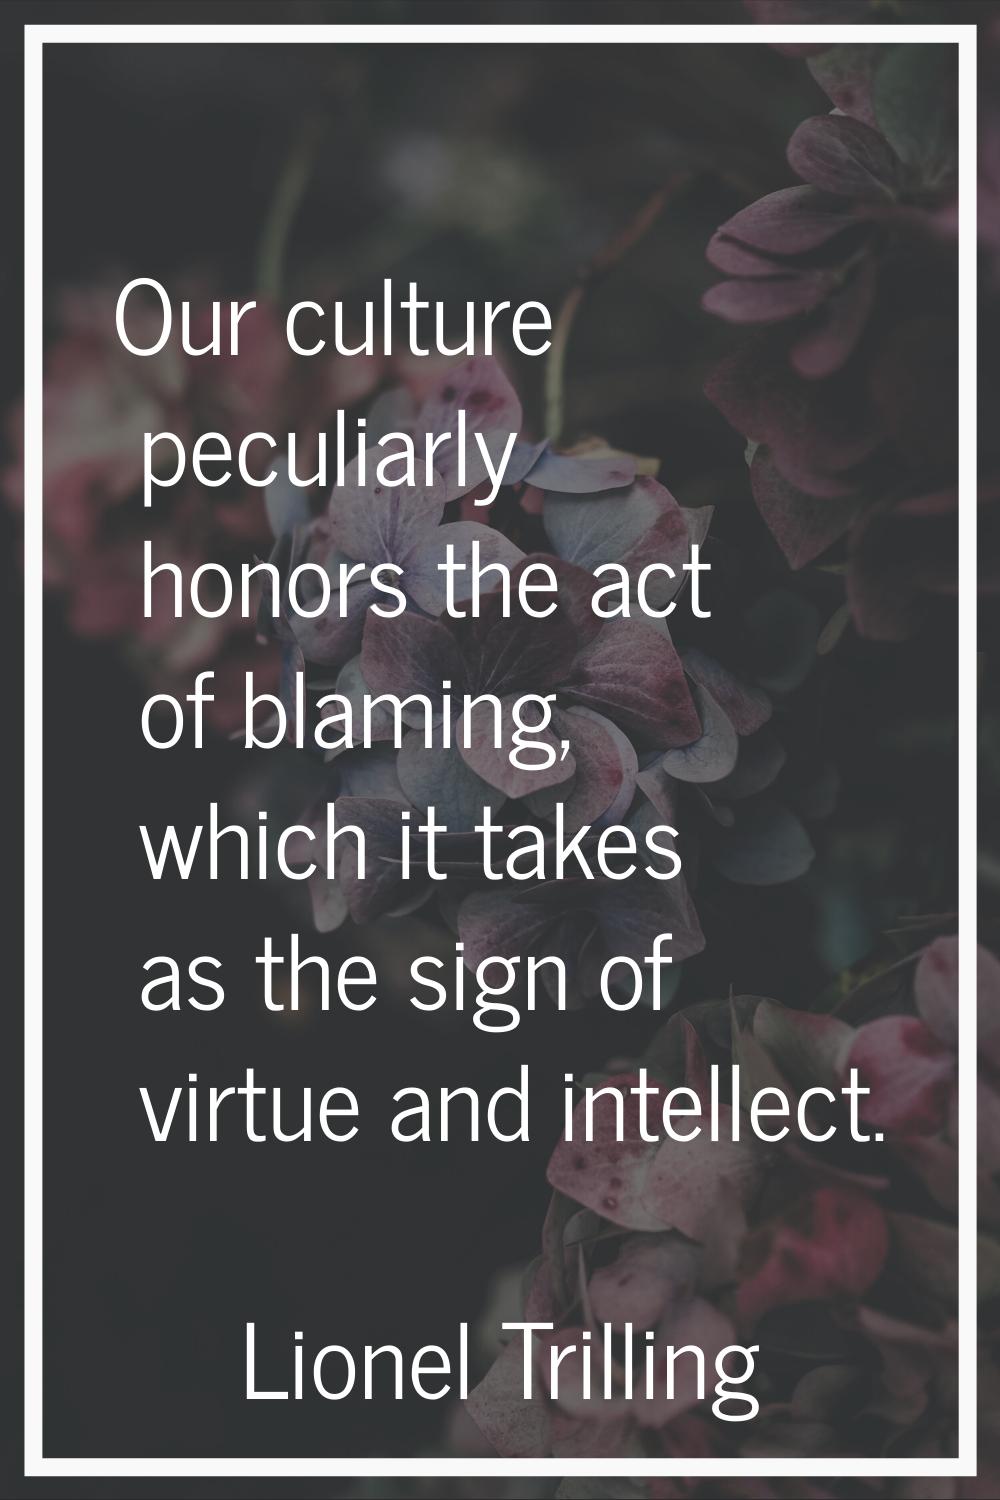 Our culture peculiarly honors the act of blaming, which it takes as the sign of virtue and intellec